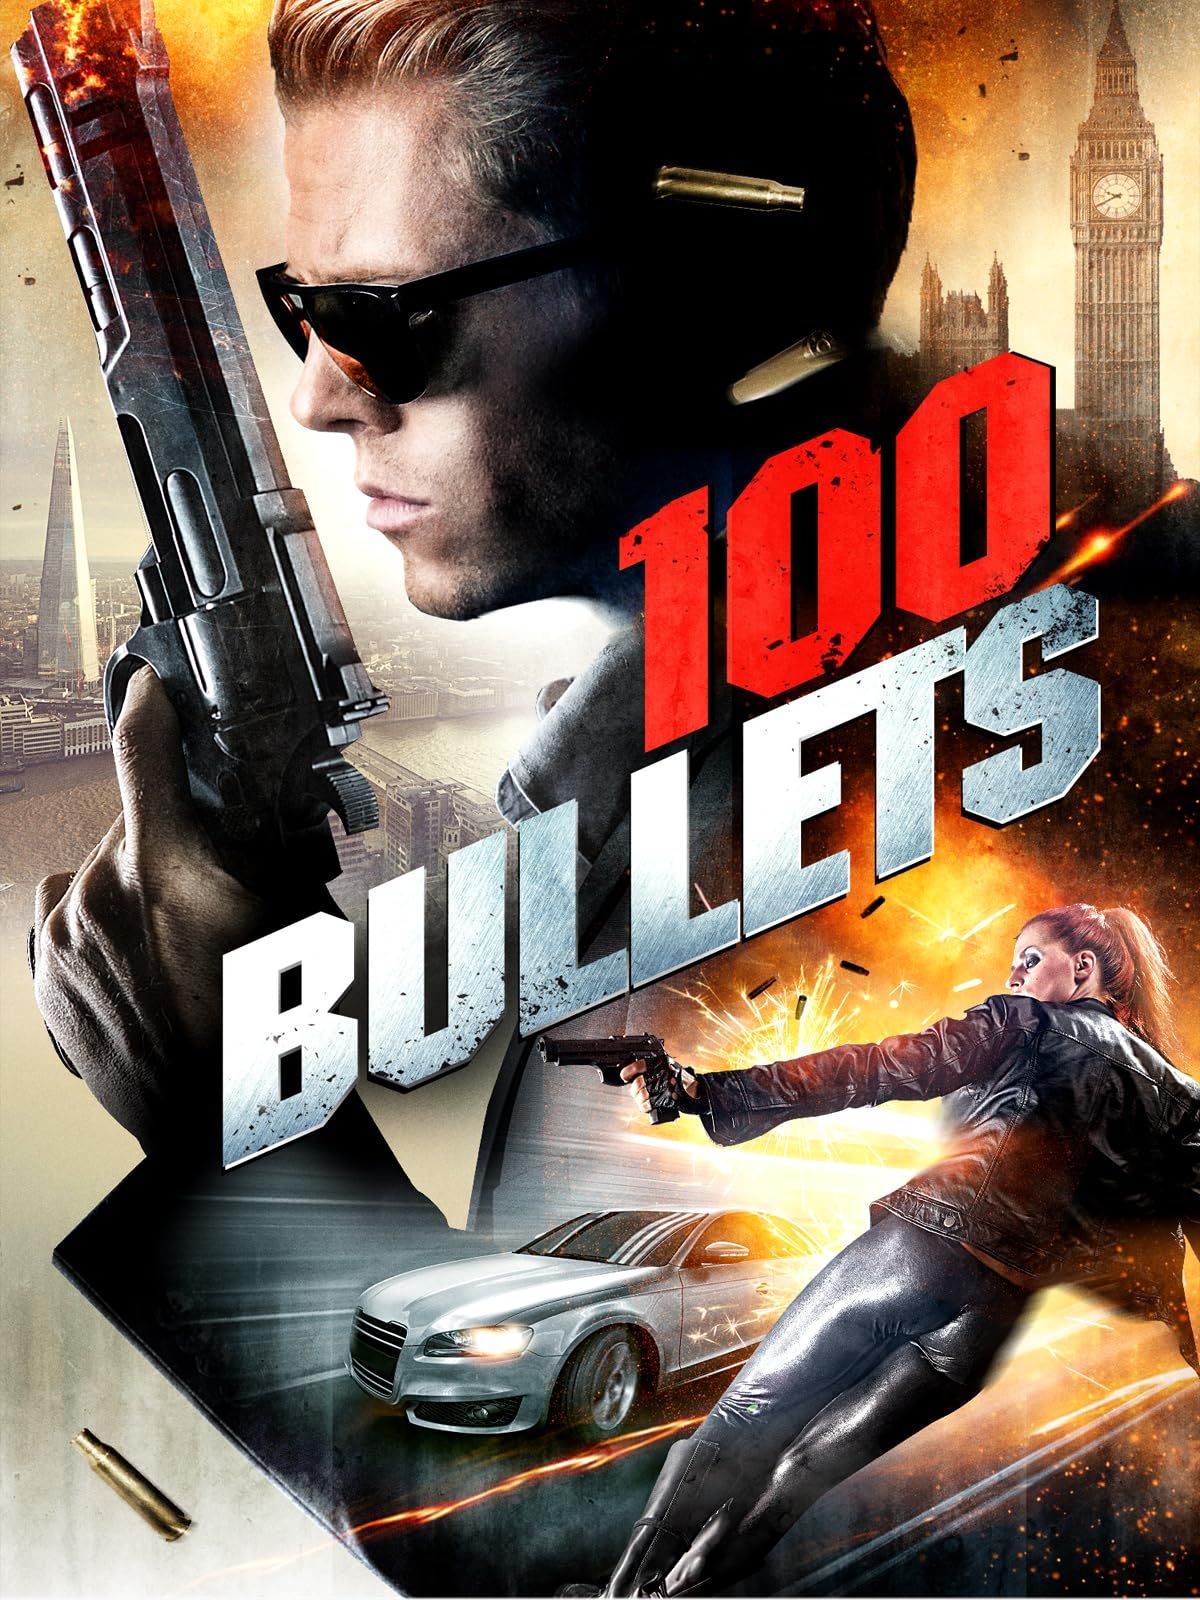 100 Bullets (2016) Hindi Dubbed Movie download full movie